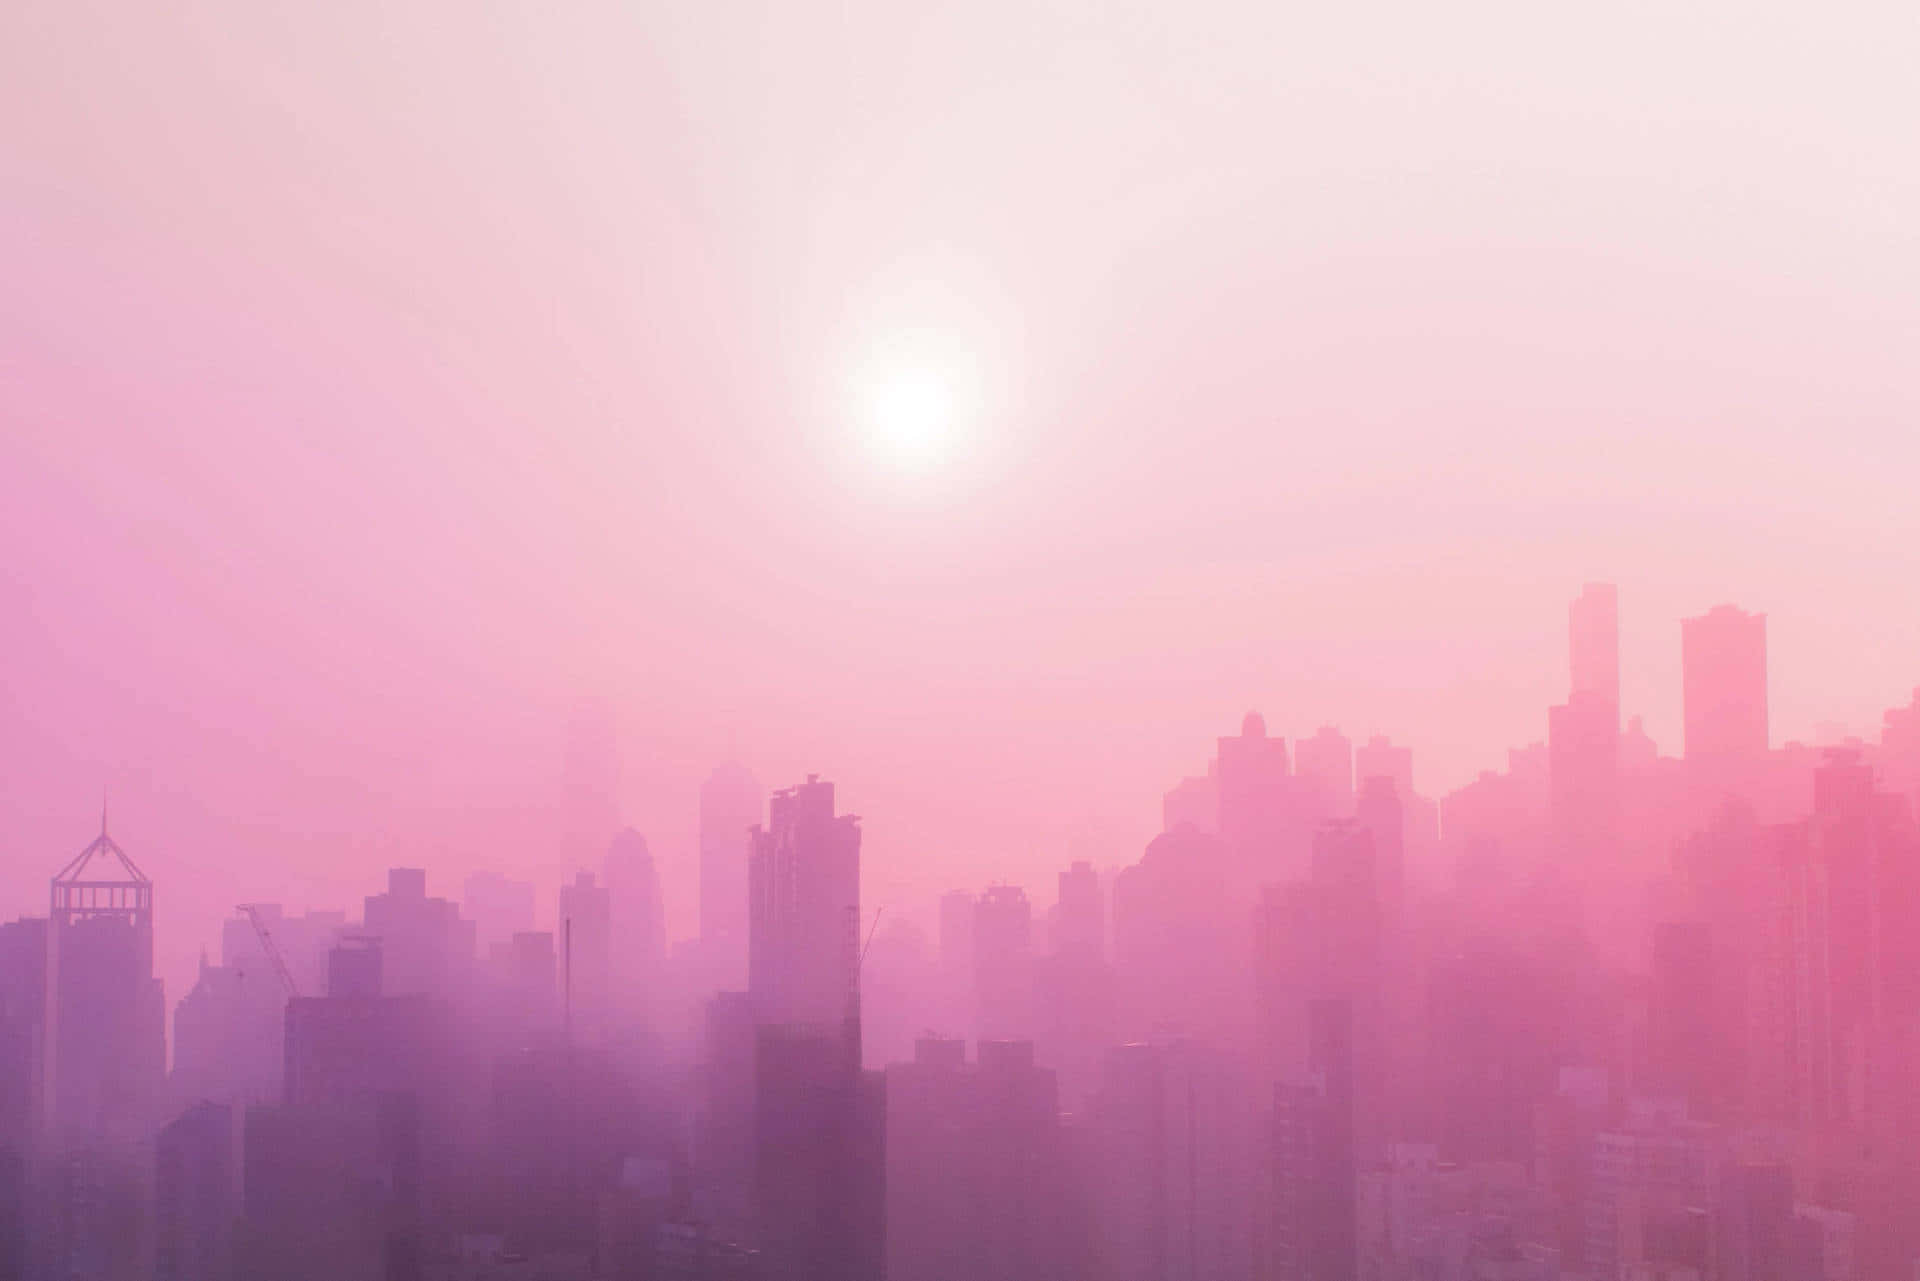 A Pink Sky With A City In The Background